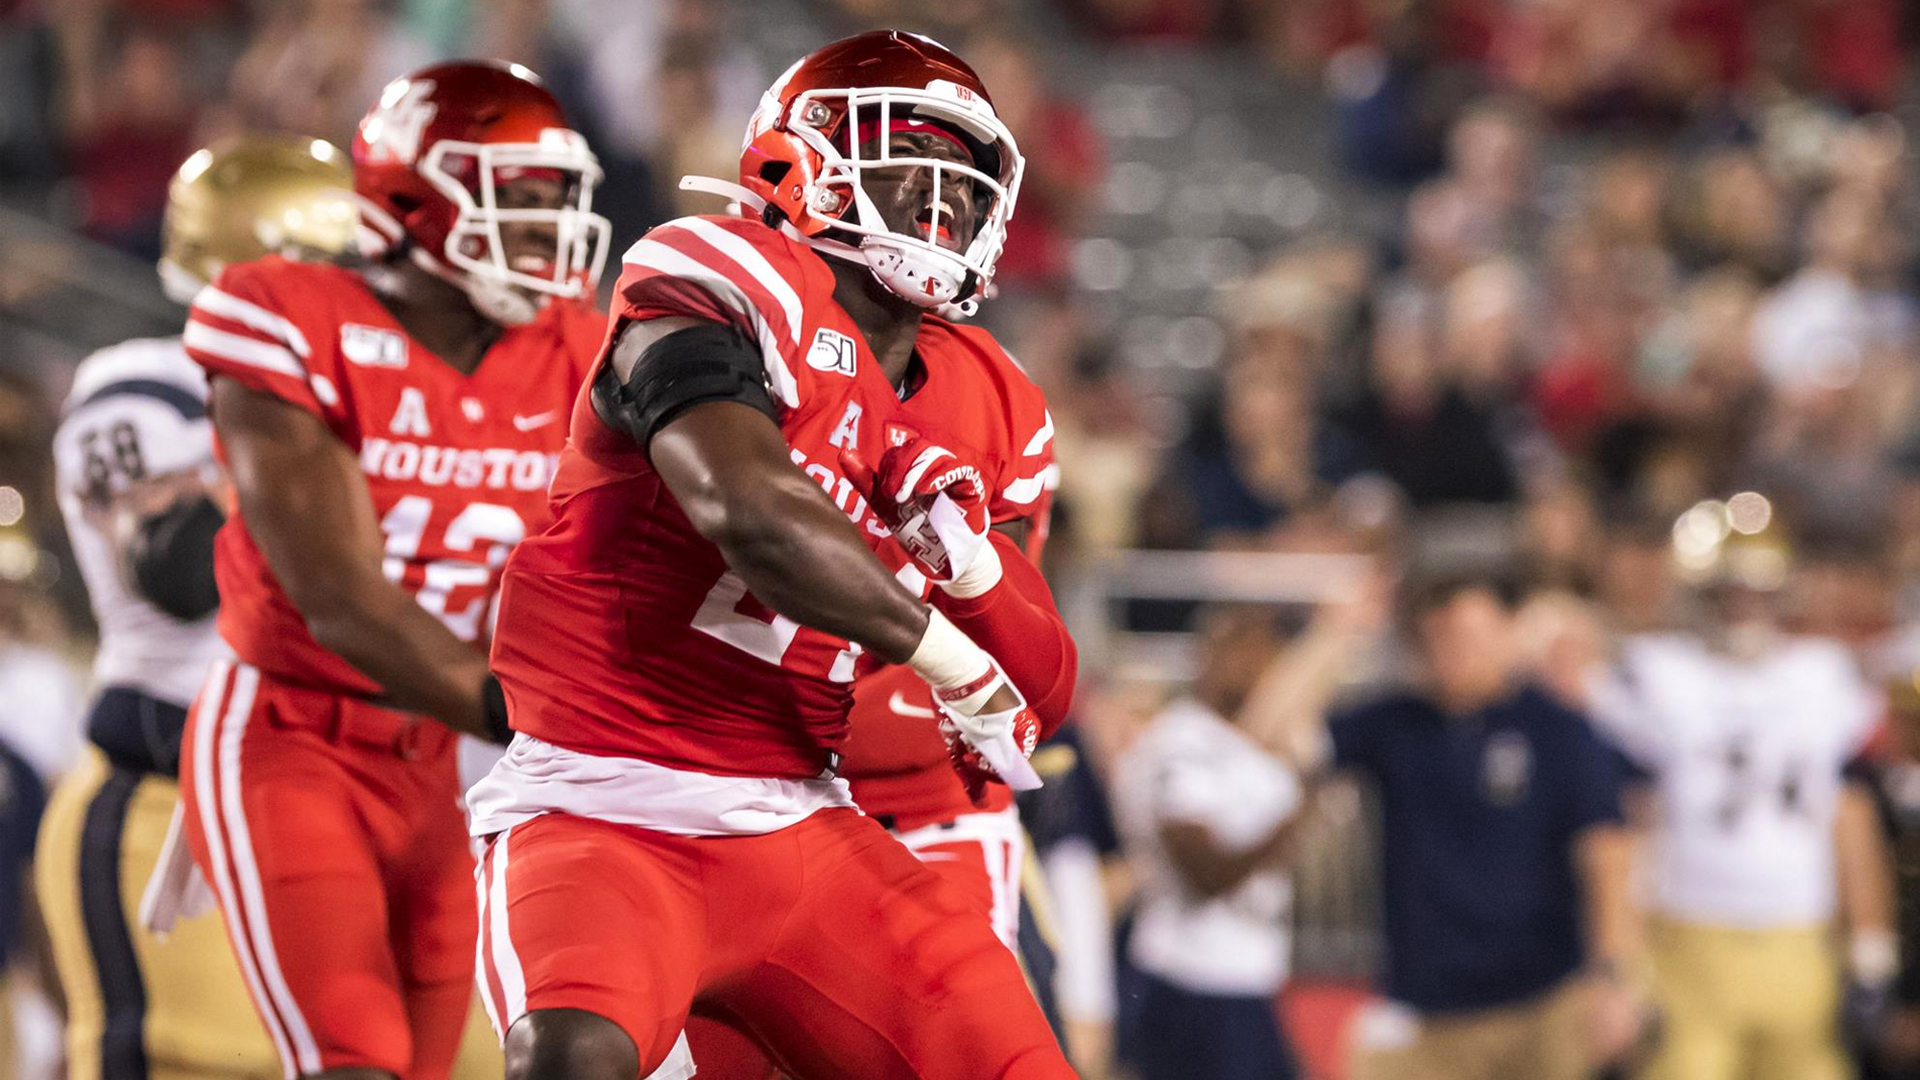 BYU vs Houston pick against the spread and prediction